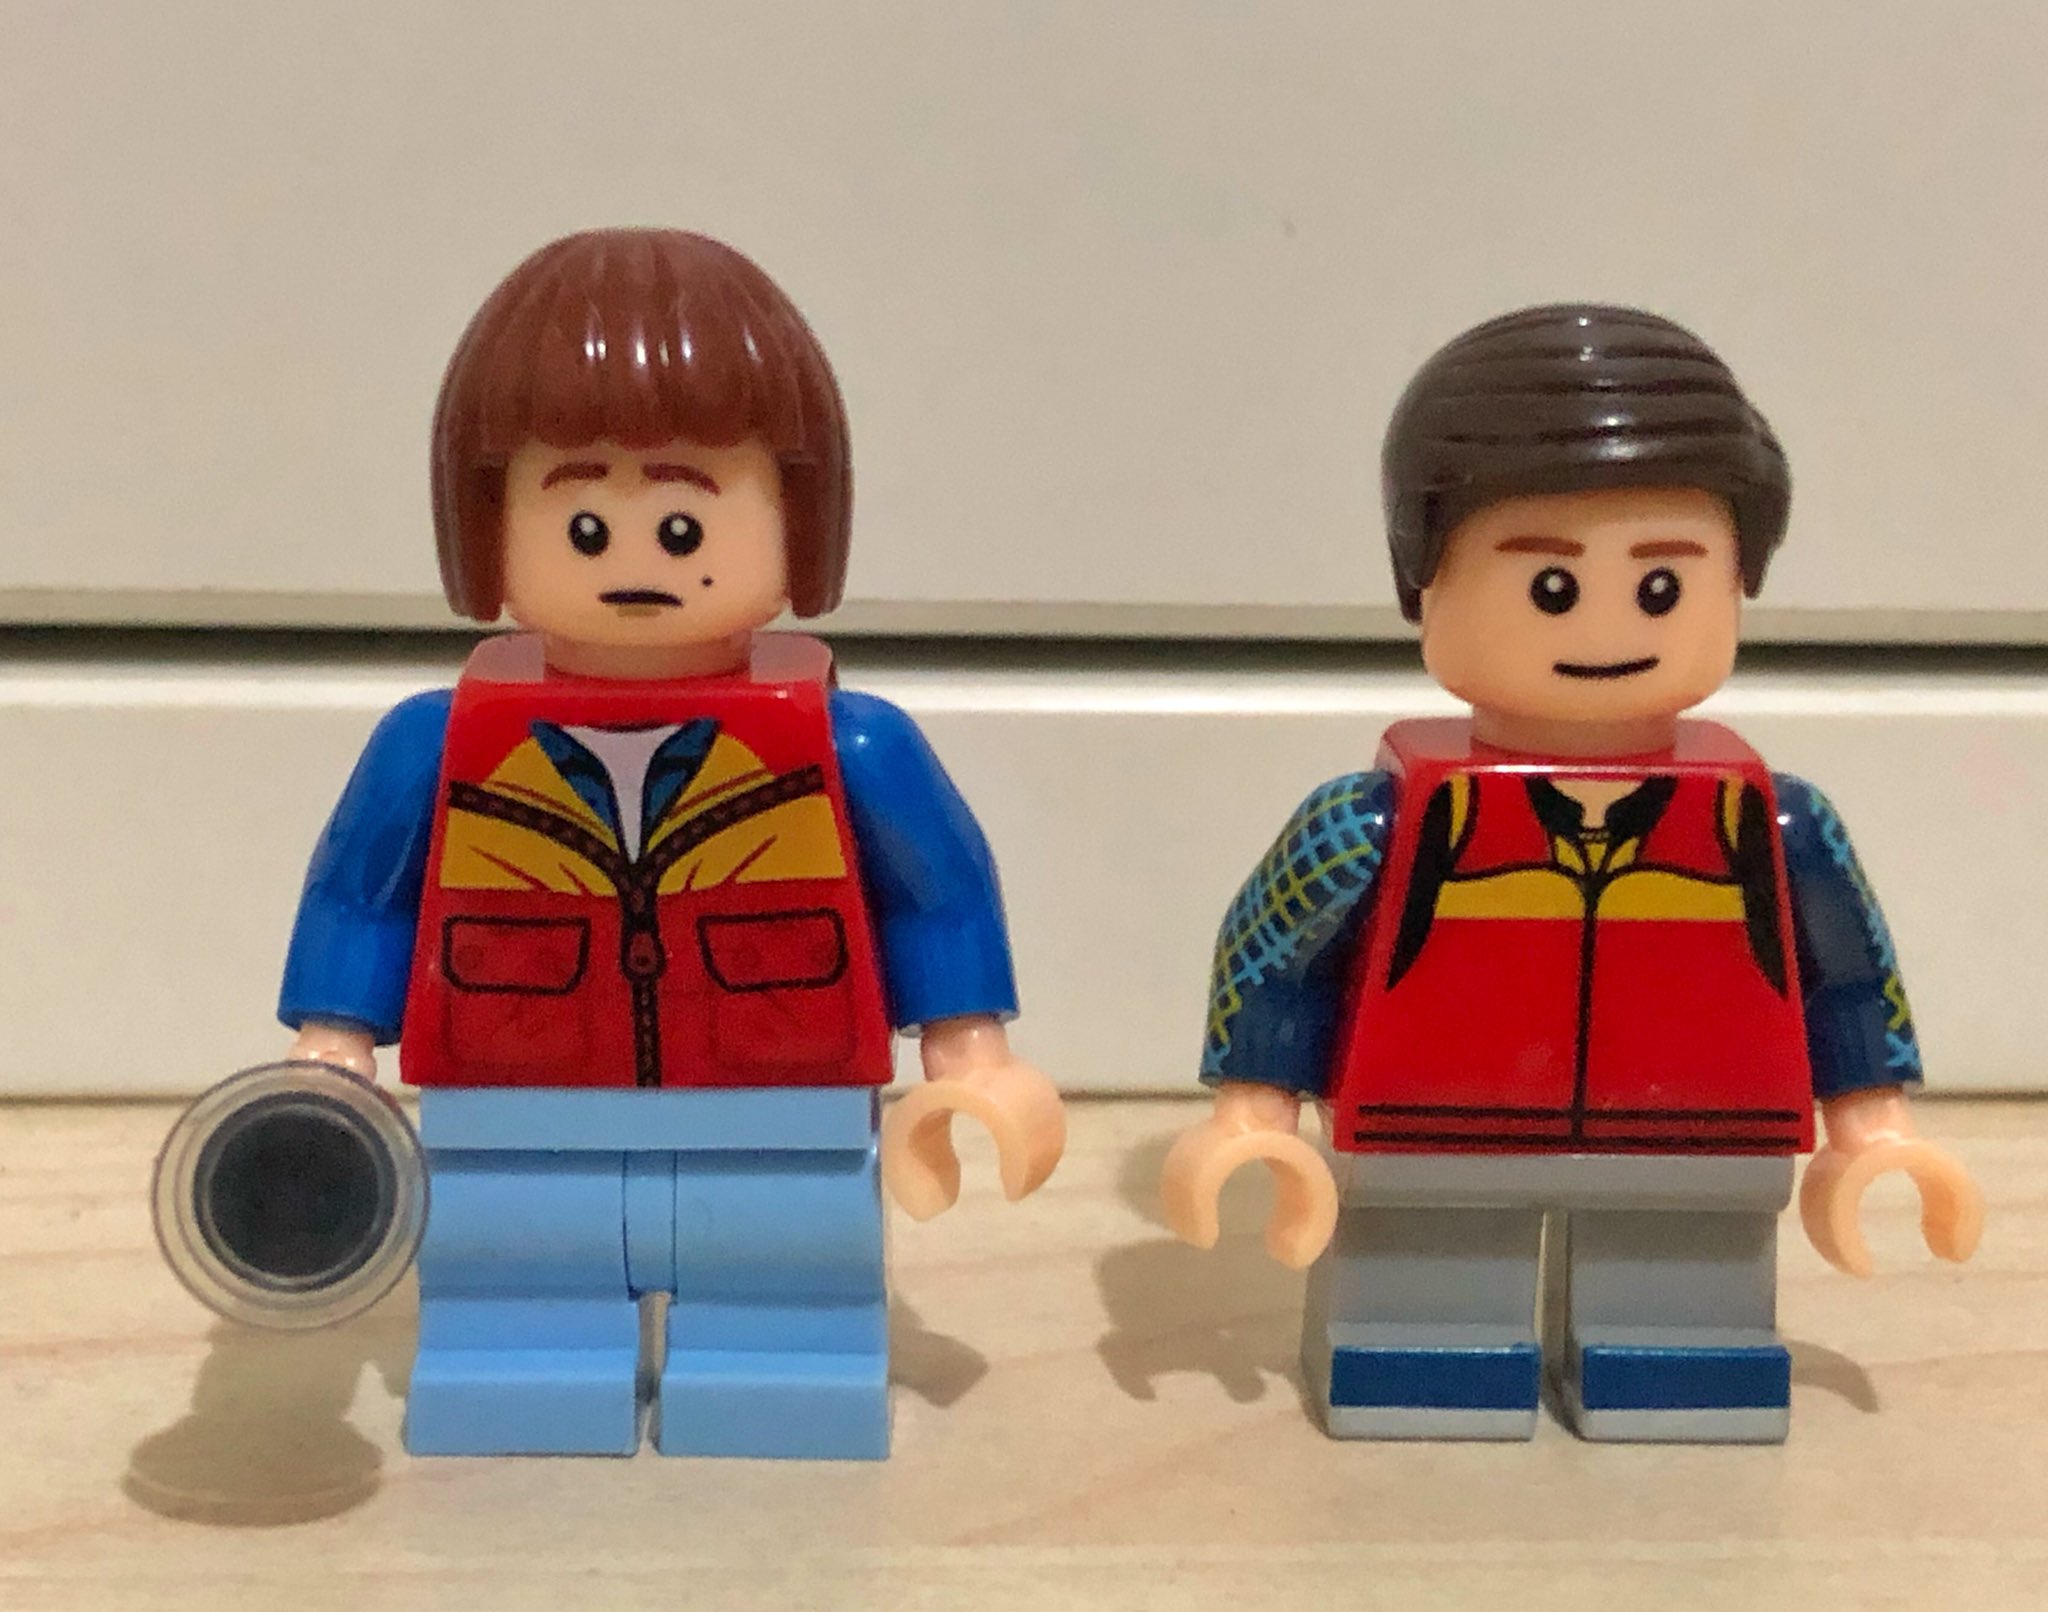 Lego on Twitter: "The new Will is better, it captured his face (and hair) better. He gets two faces. Regular and scared. El has a plastic dress now, the old one